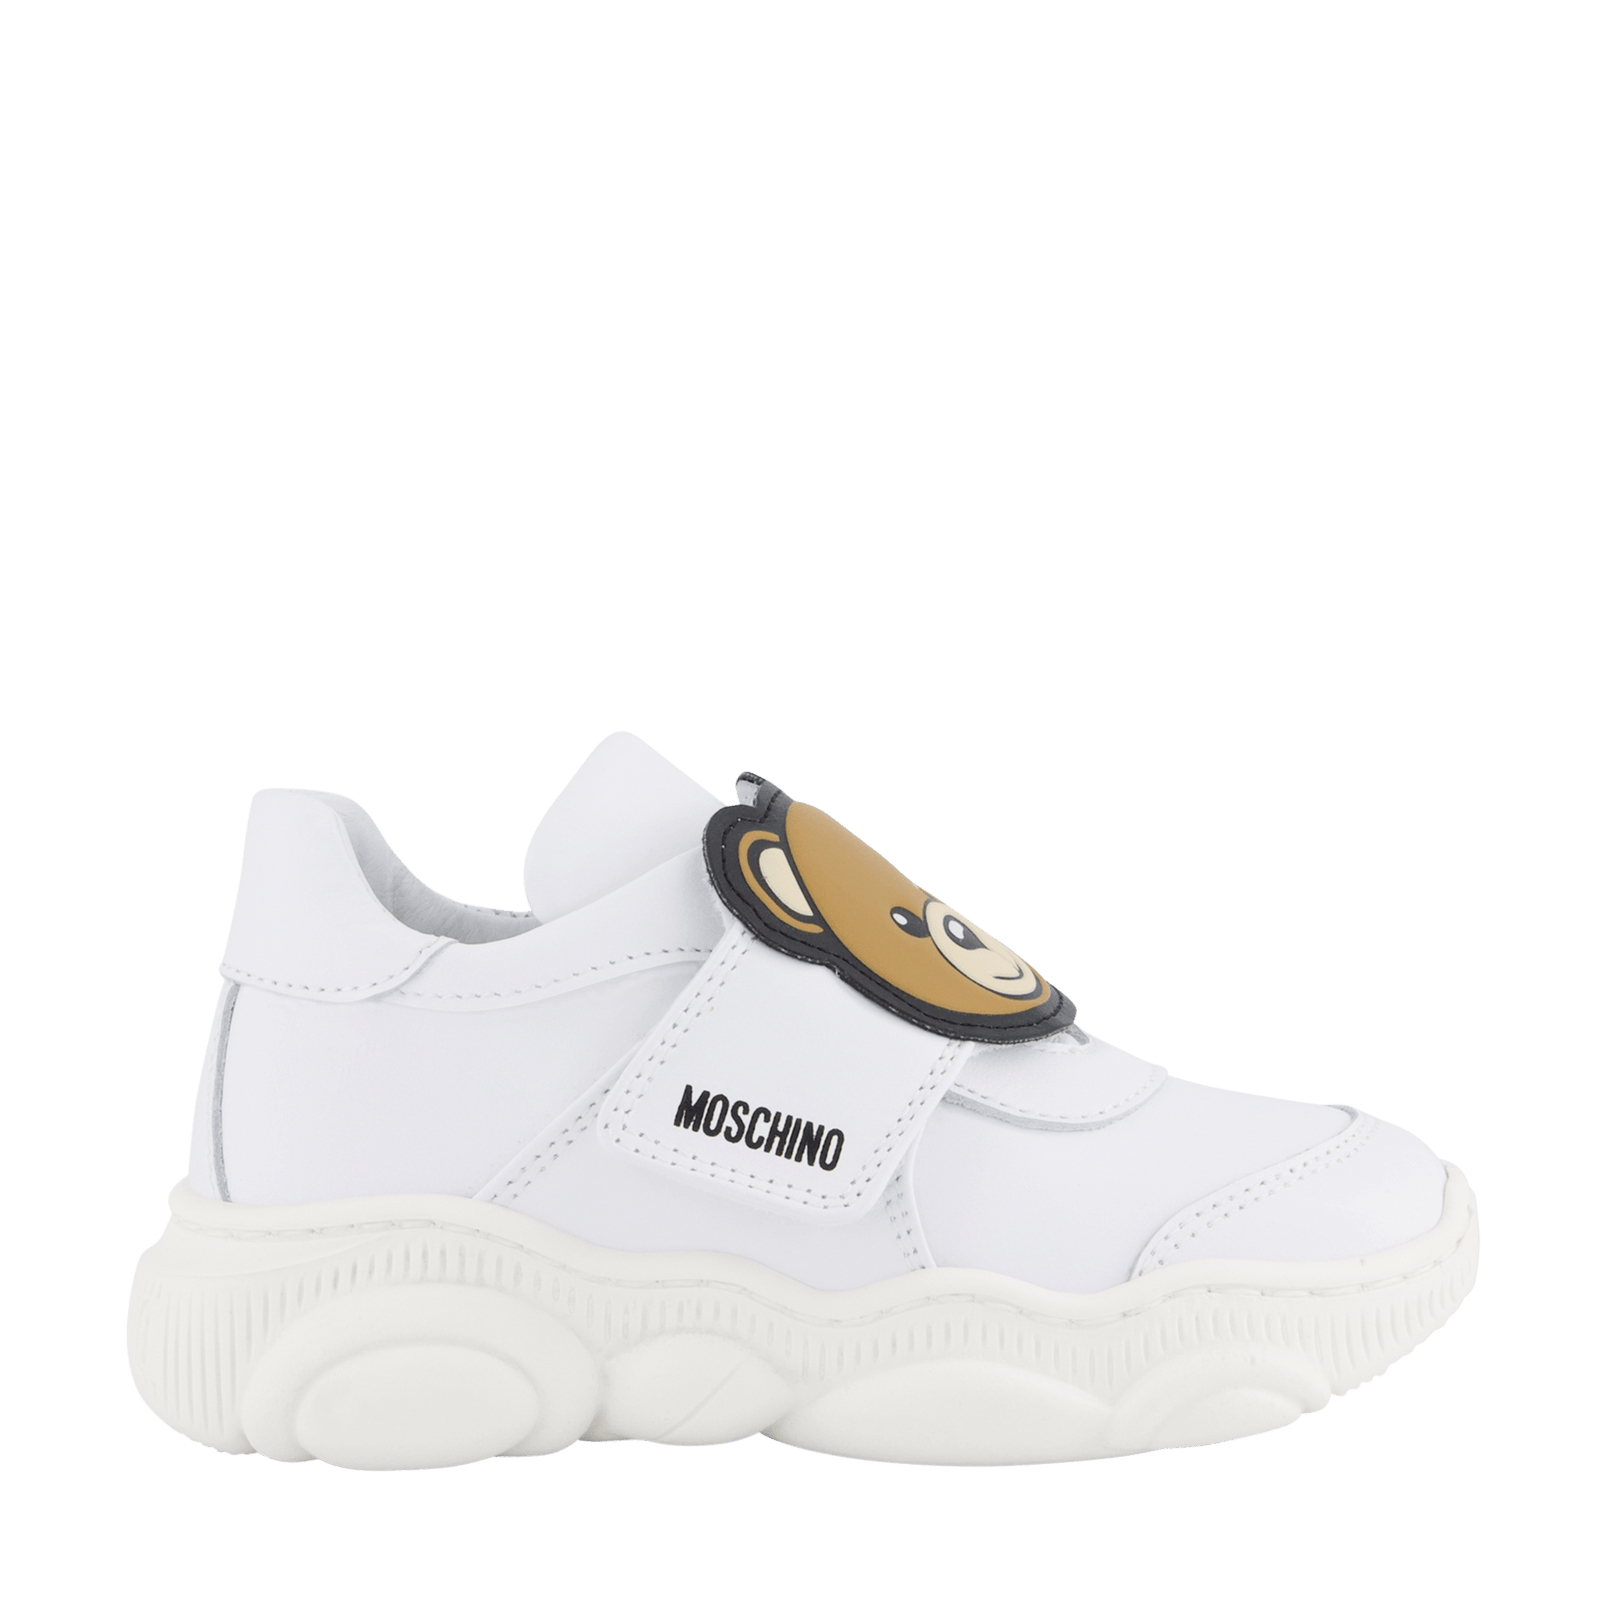 Moschino Kinder Unisex Sneakers Wit 19